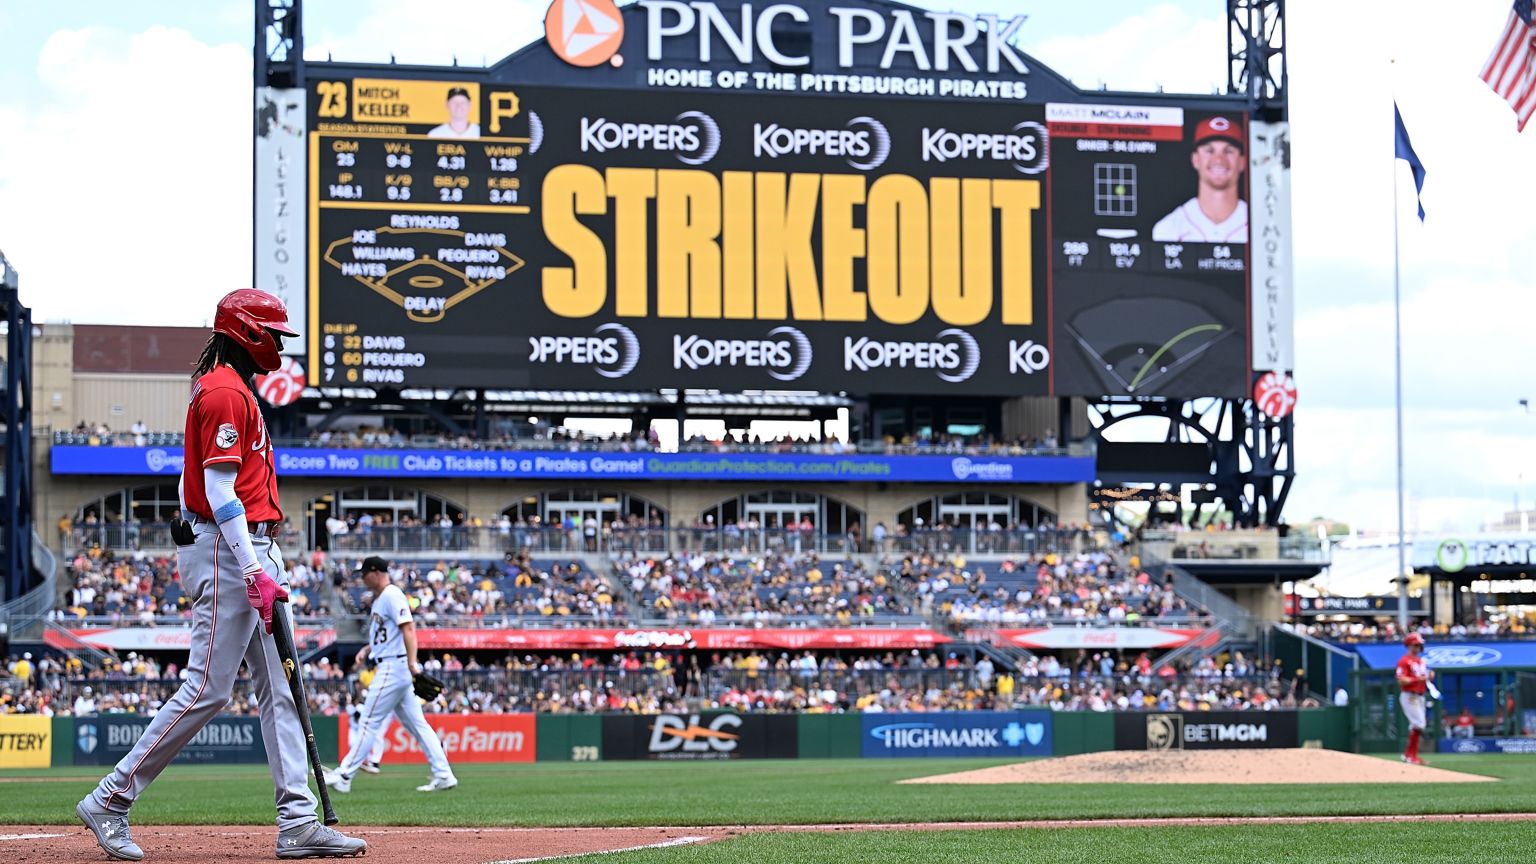 Blue Jays stadium news: Team discussing playing 2020 season at Pirates PNC  Park - DraftKings Network